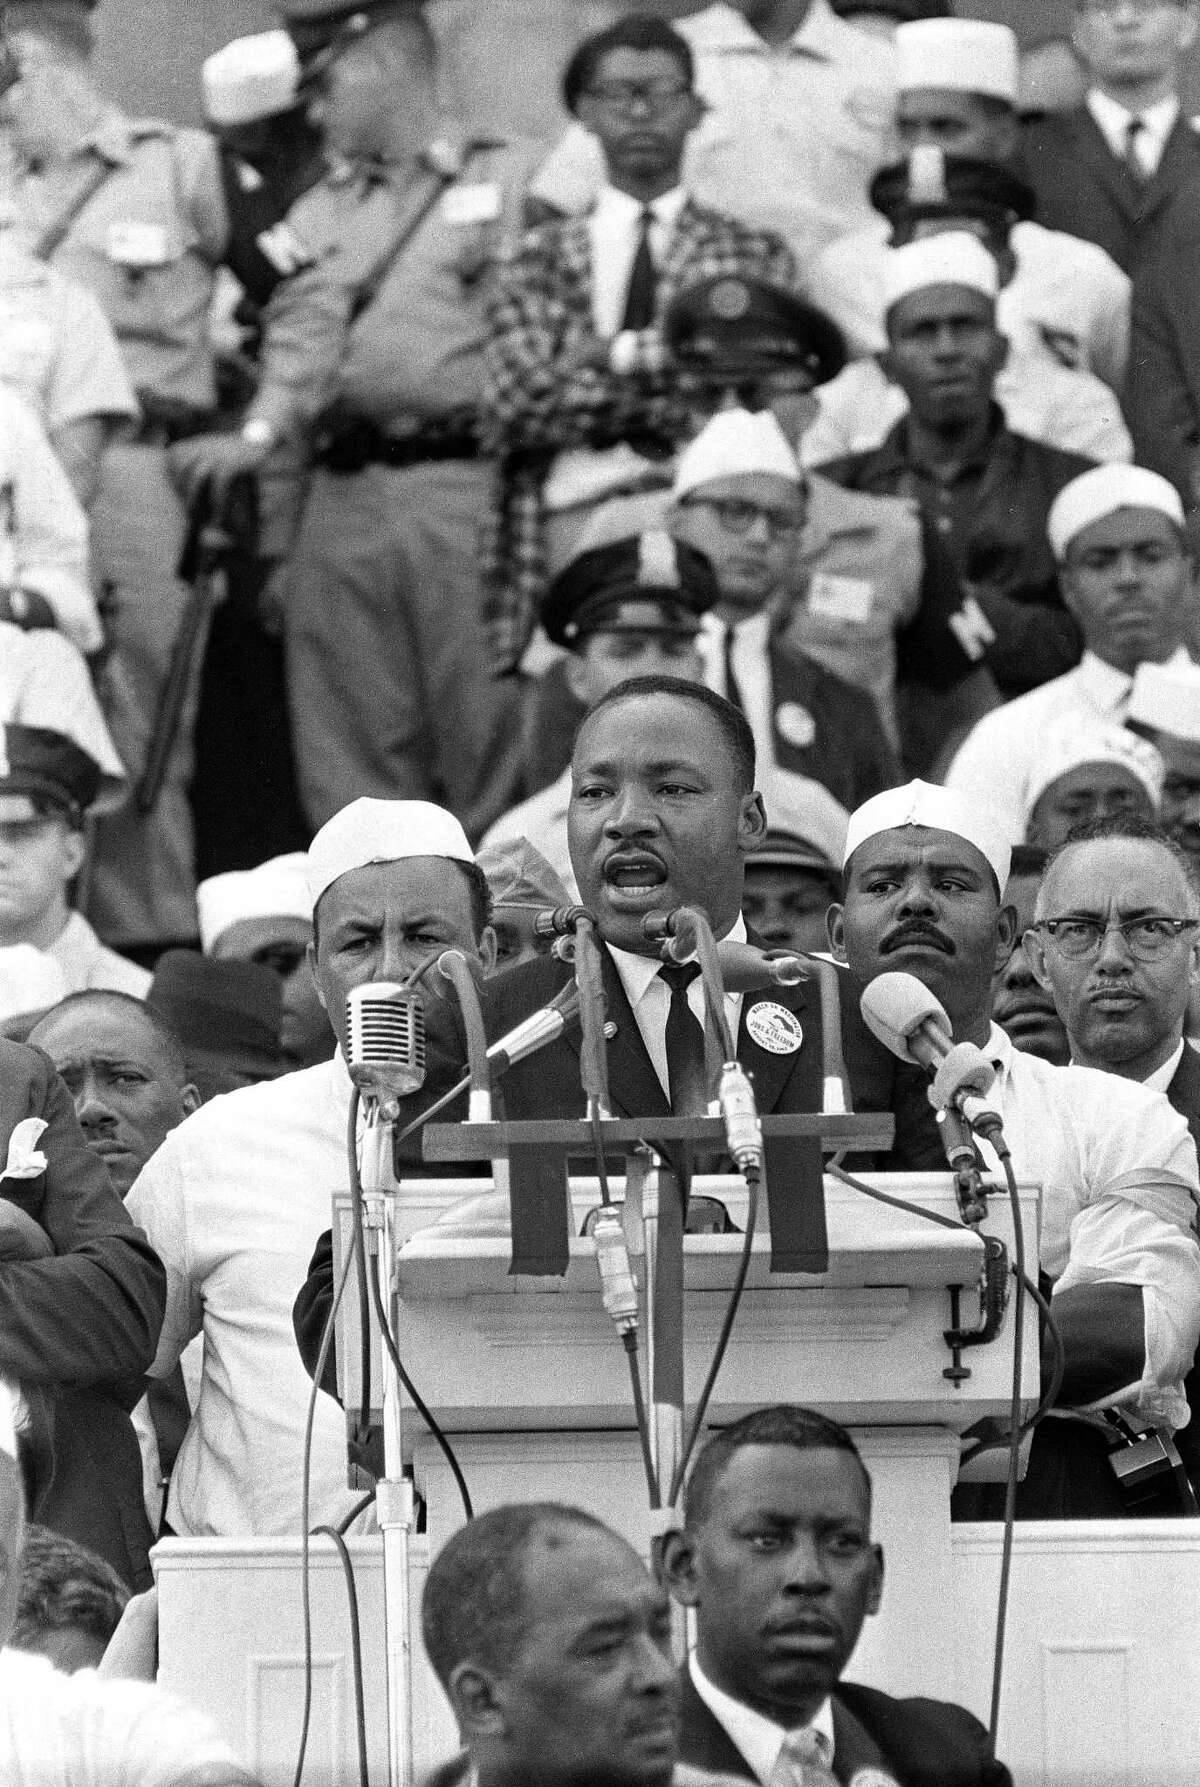 In this Aug. 28, 1963, photo, The Rev. Dr. Martin Luther King Jr., head of the Southern Christian Leadership Conference, gestures during his “I Have a Dream” speech as he addresses thousands of civil rights supporters gathered in Washington, D.C. Months before the Rev. Martin Luther King Jr. delivered his famous speech to hundreds of thousands of people, he fine-tuned his civil rights message before a much smaller audience in North Carolina. Reporters had covered King’s 55-minute speech at a high school gymnasium in Rocky Mount on Nov. 27, 1962, but a recording was not known to exist until English professor Jason Miller found an aging reel-to-reel tape in the townís public library.